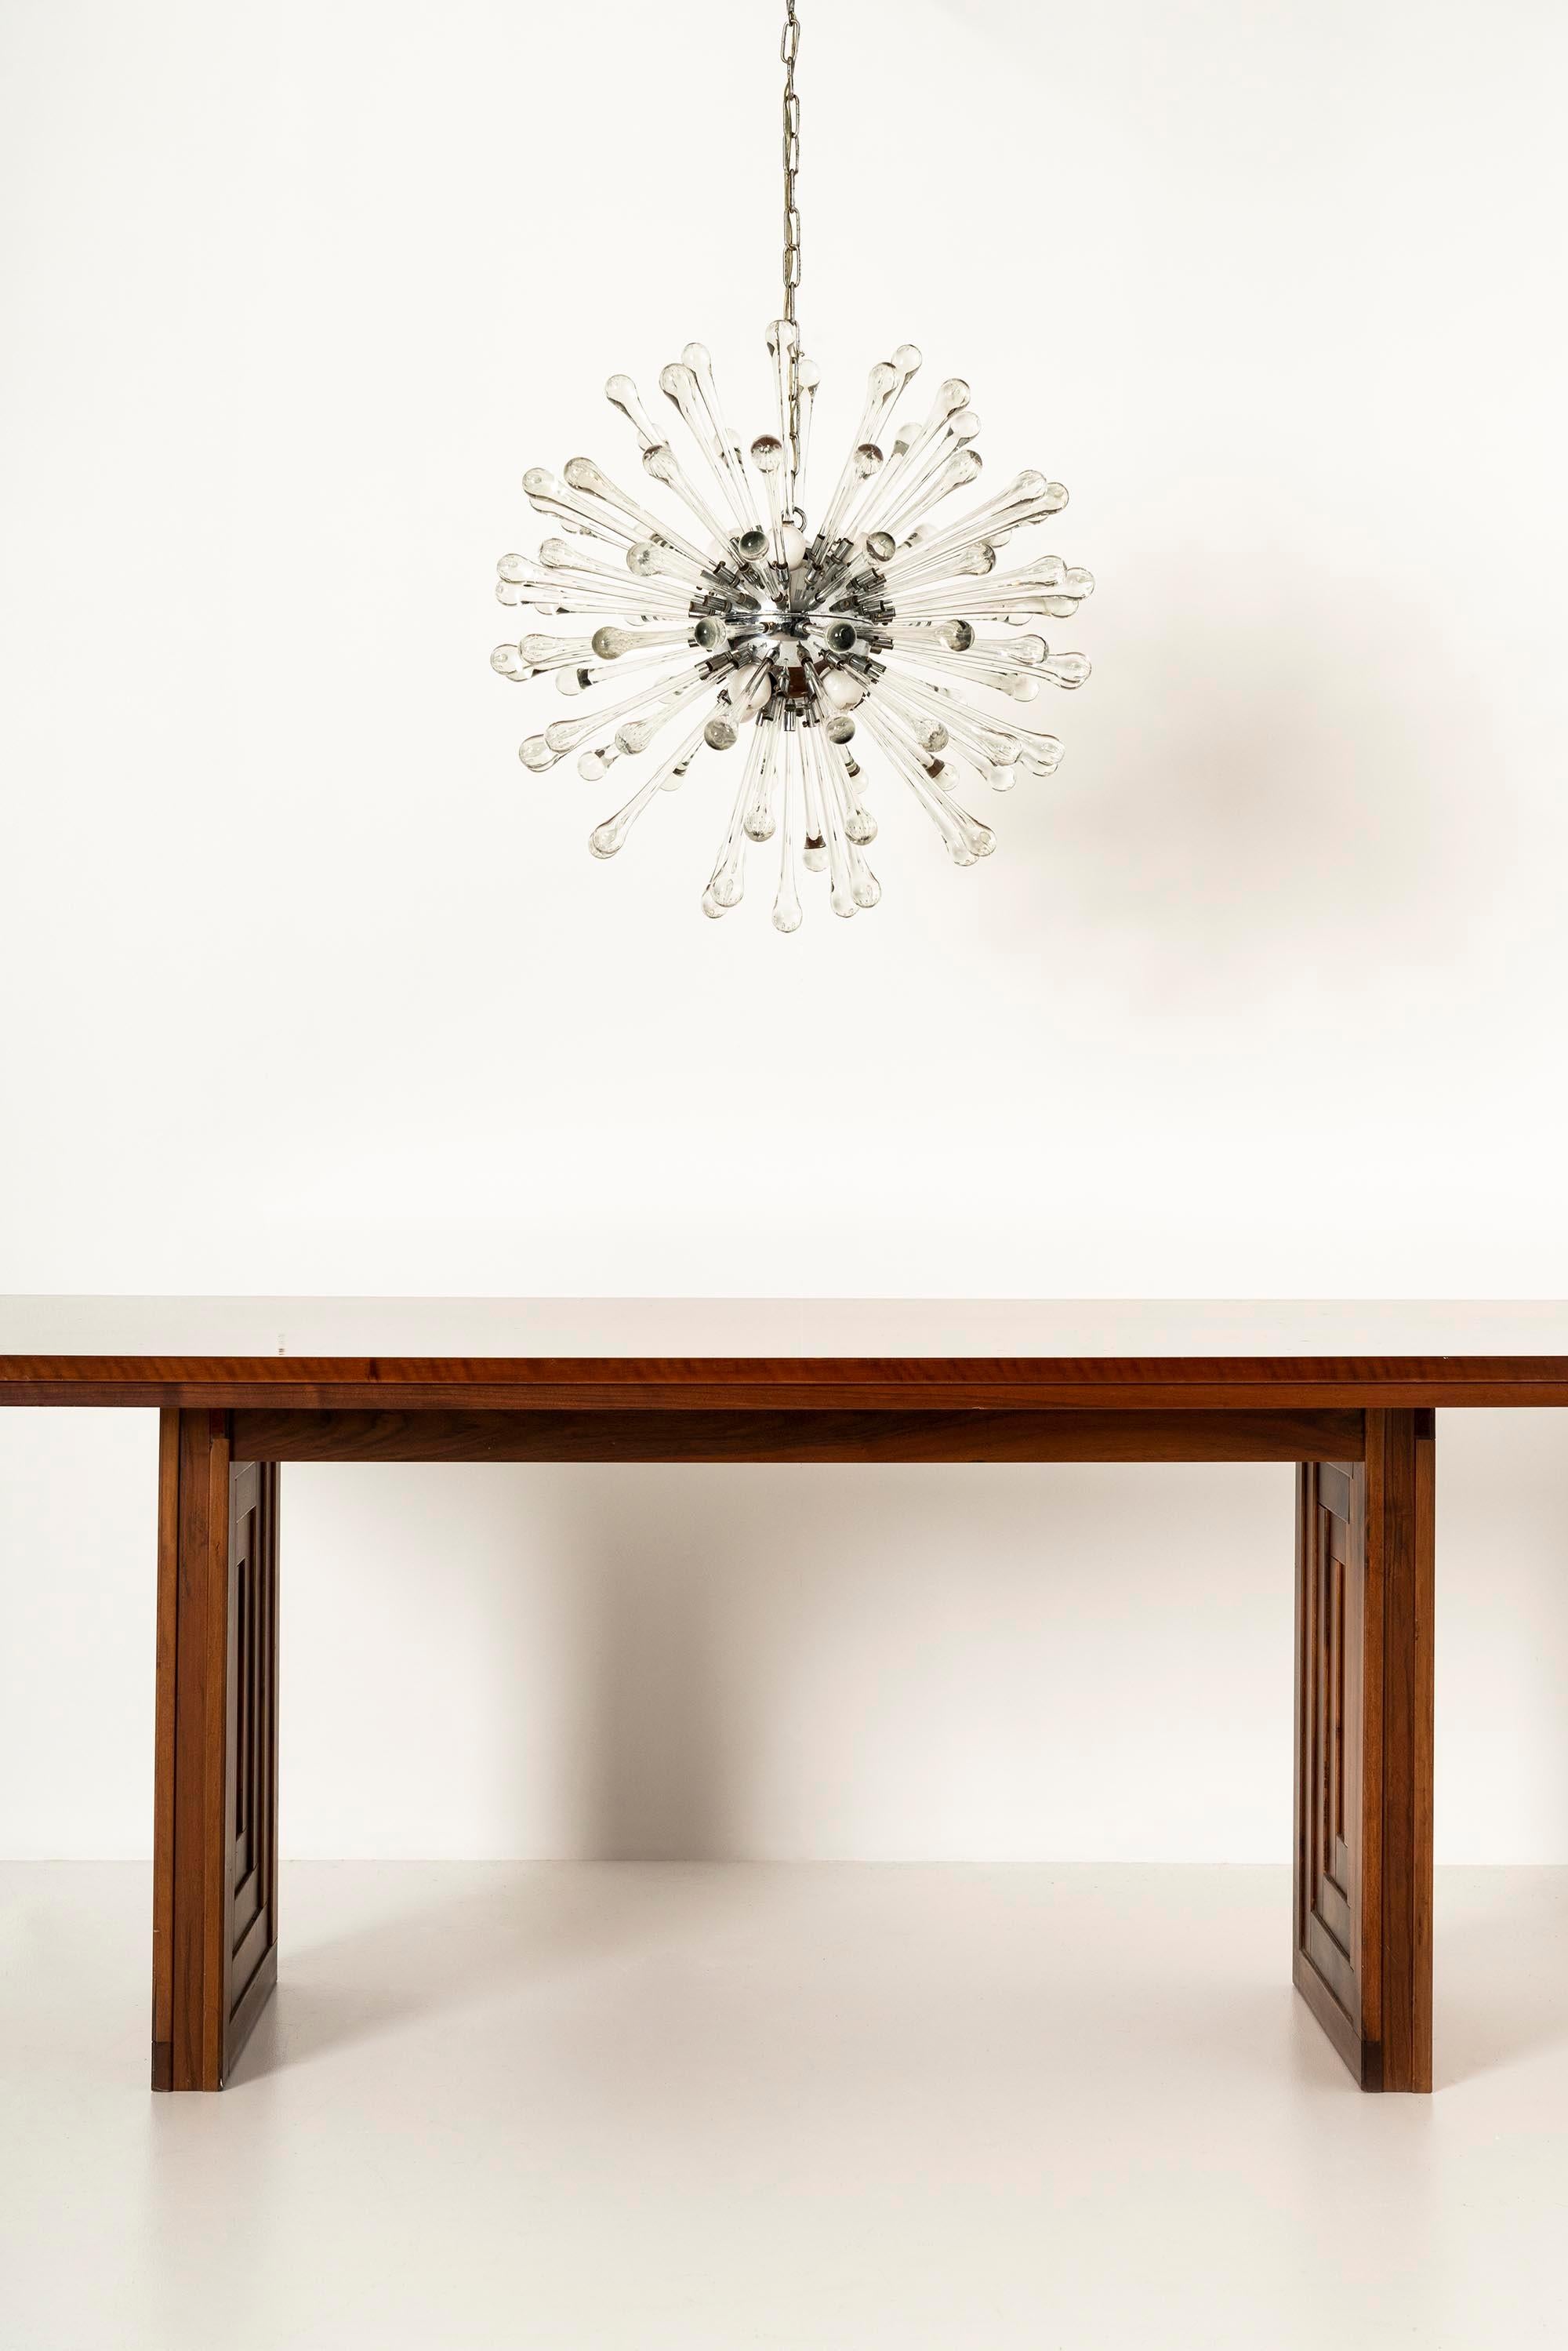 Sputnik Chandelier with Murano Glass Drops, Italy 1960s For Sale 4